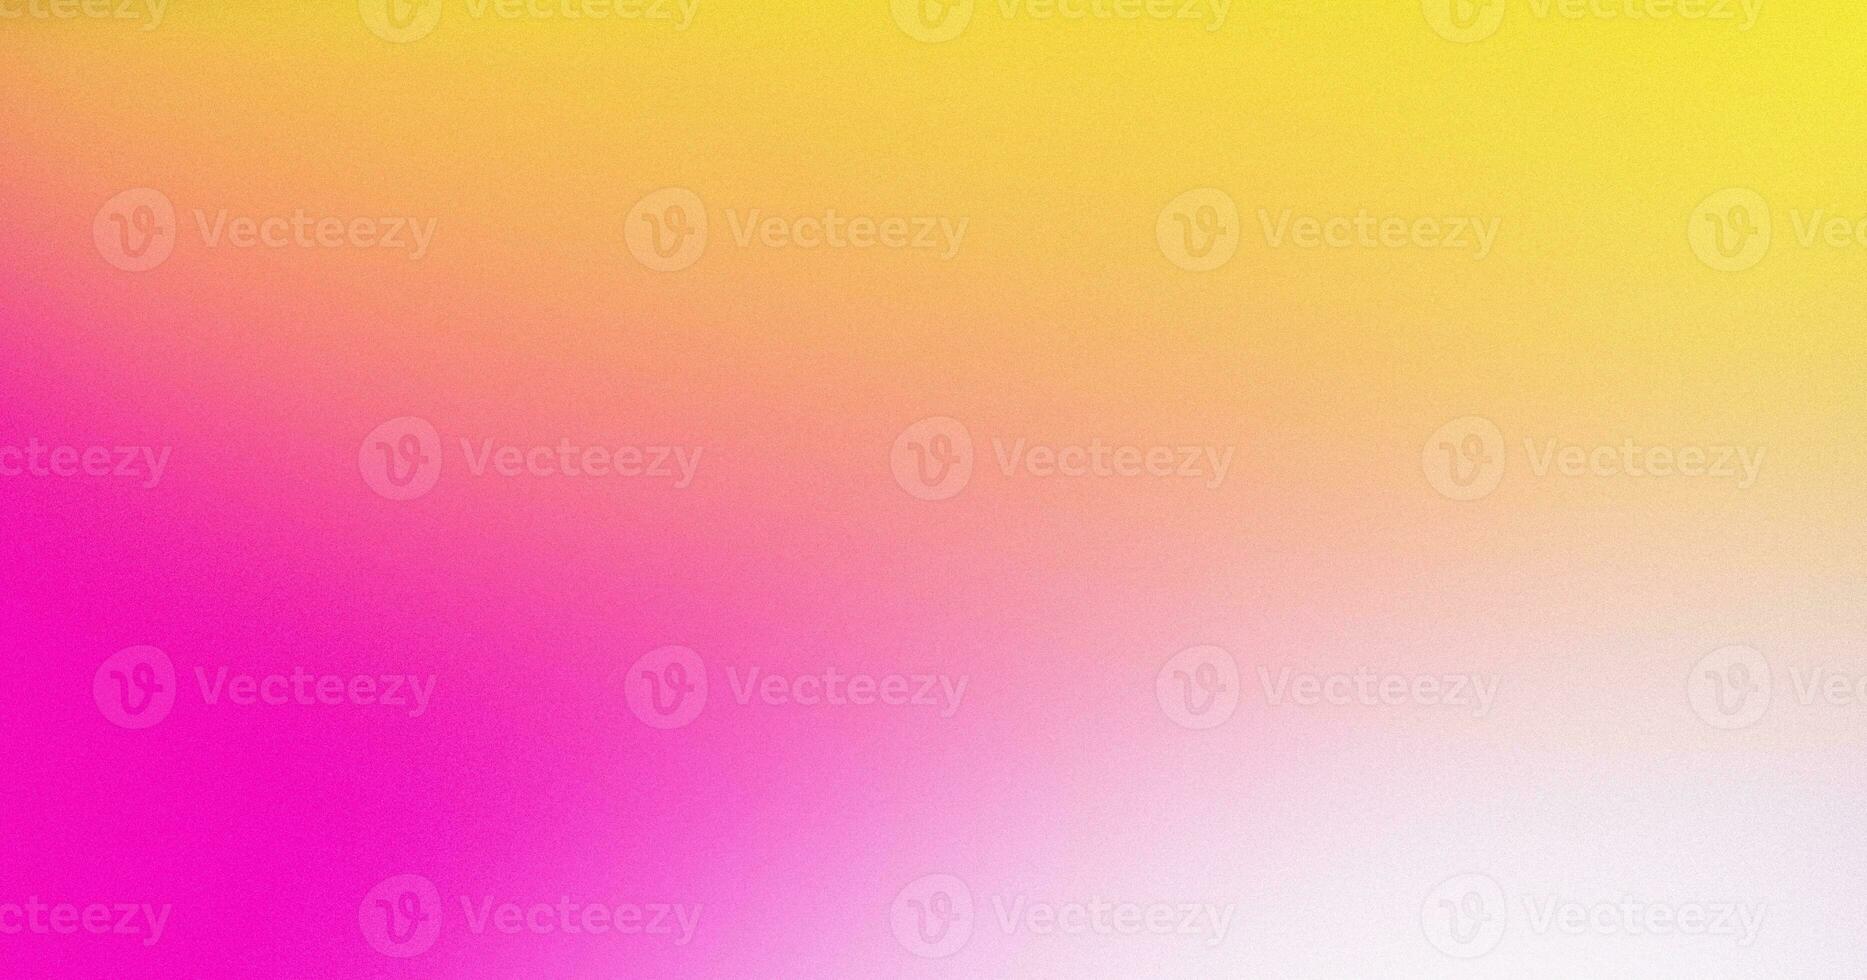 Yellow white magenta pink grainy gradient background, blurred smooth color textured social media website banner design photo